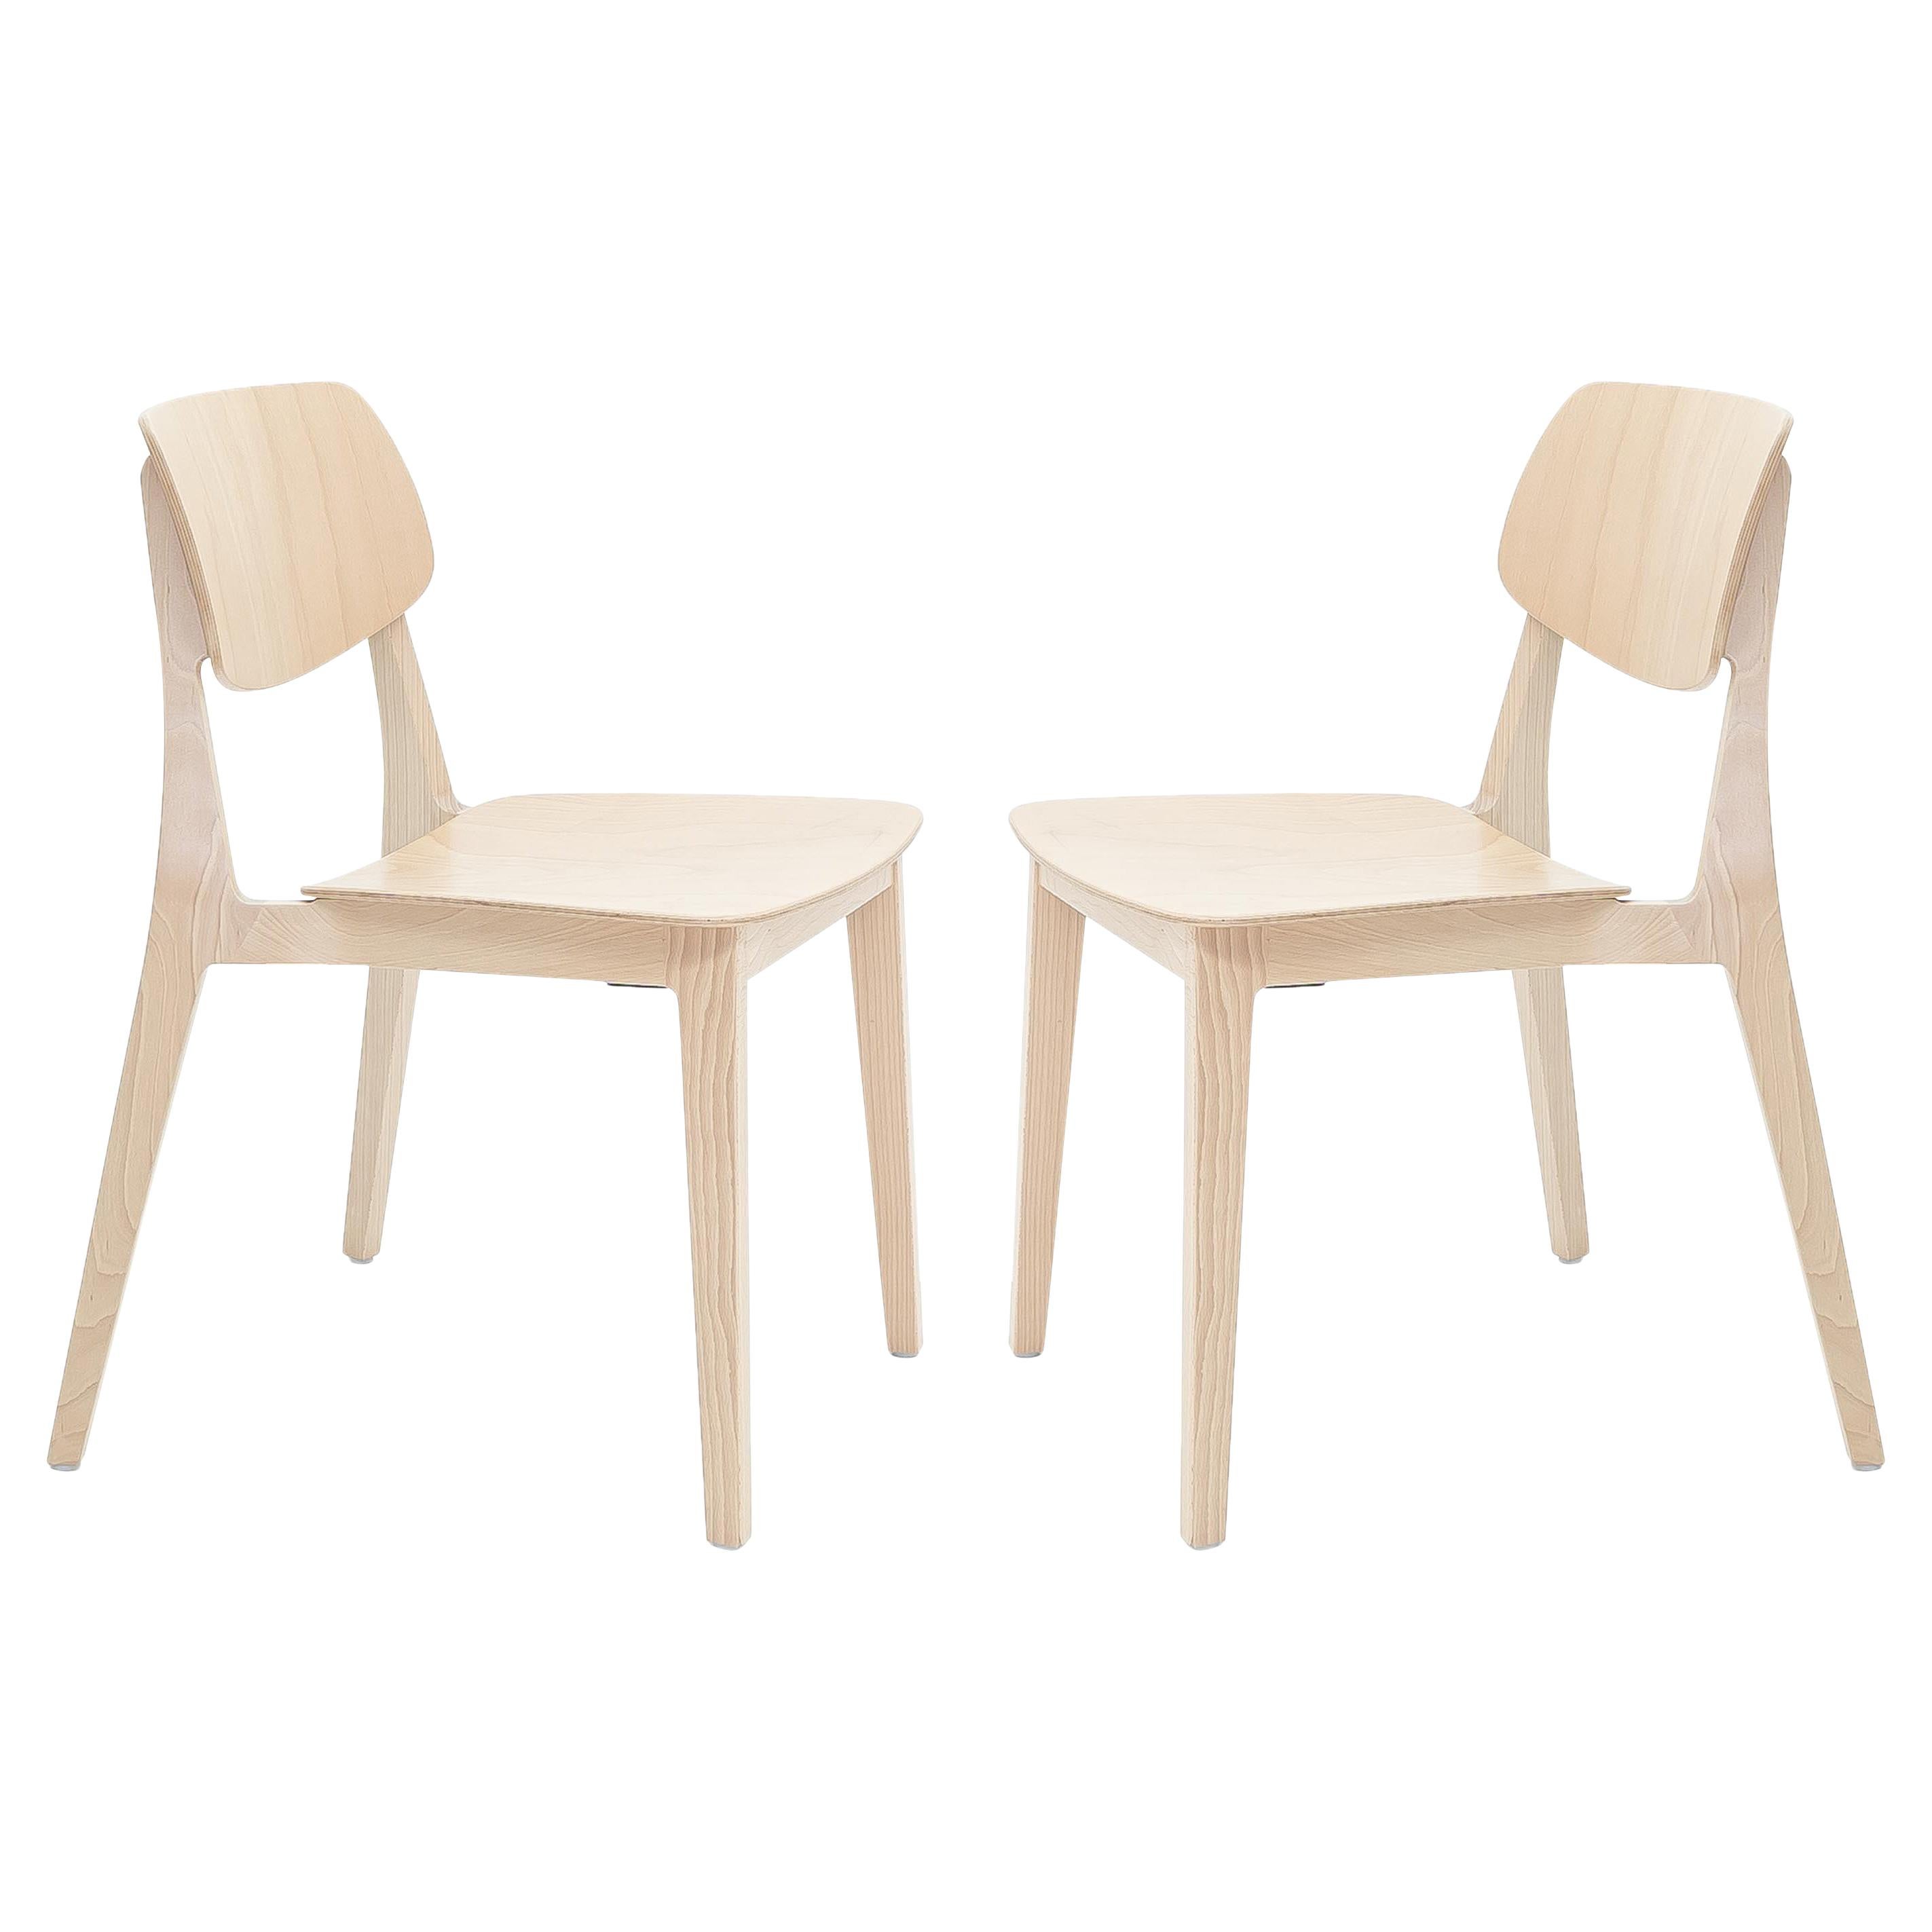 Felber C14 Beech Wood Chairs by Dietiker, Exchangeable Back and Seat, Set of 2 For Sale